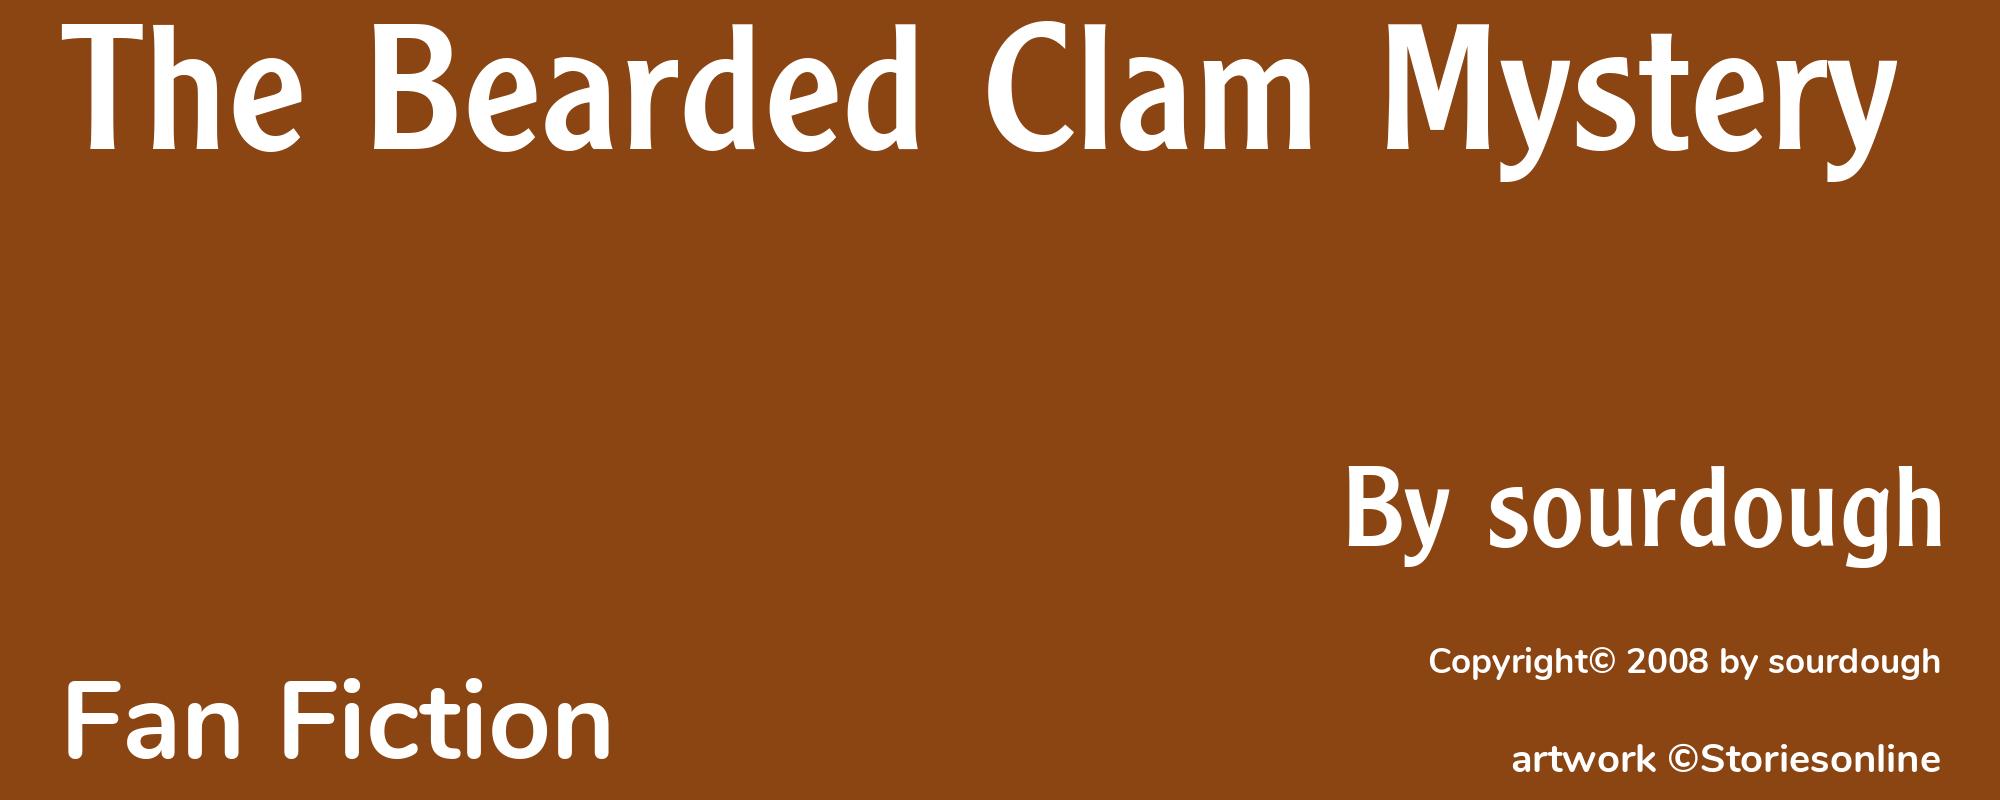 The Bearded Clam Mystery - Cover